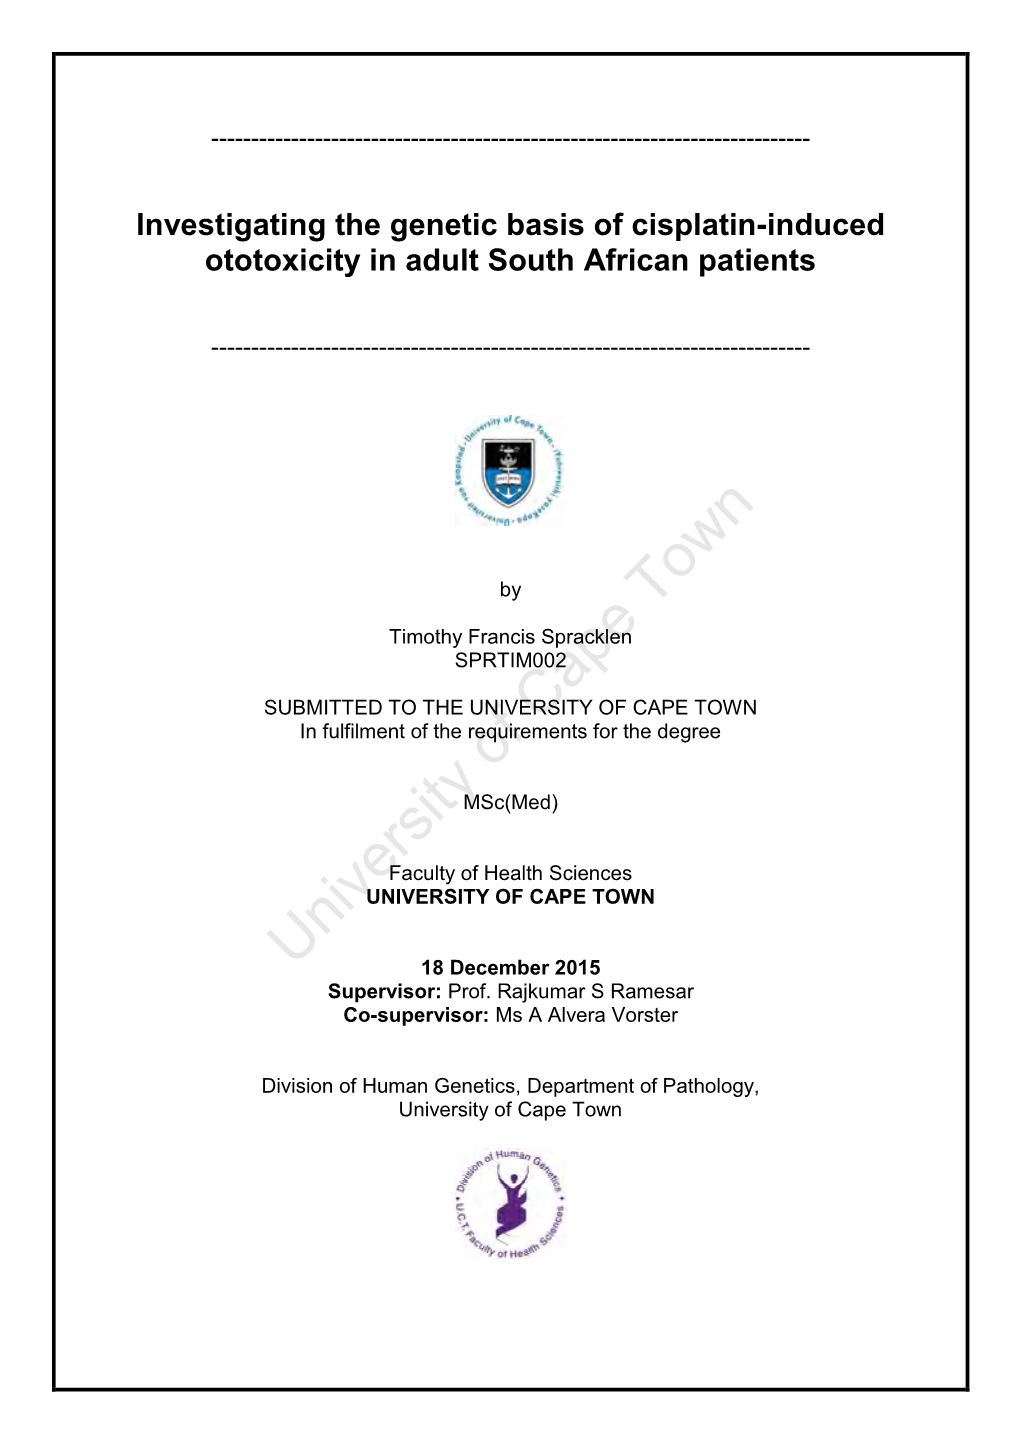 Investigating the Genetic Basis of Cisplatin-Induced Ototoxicity in Adult South African Patients